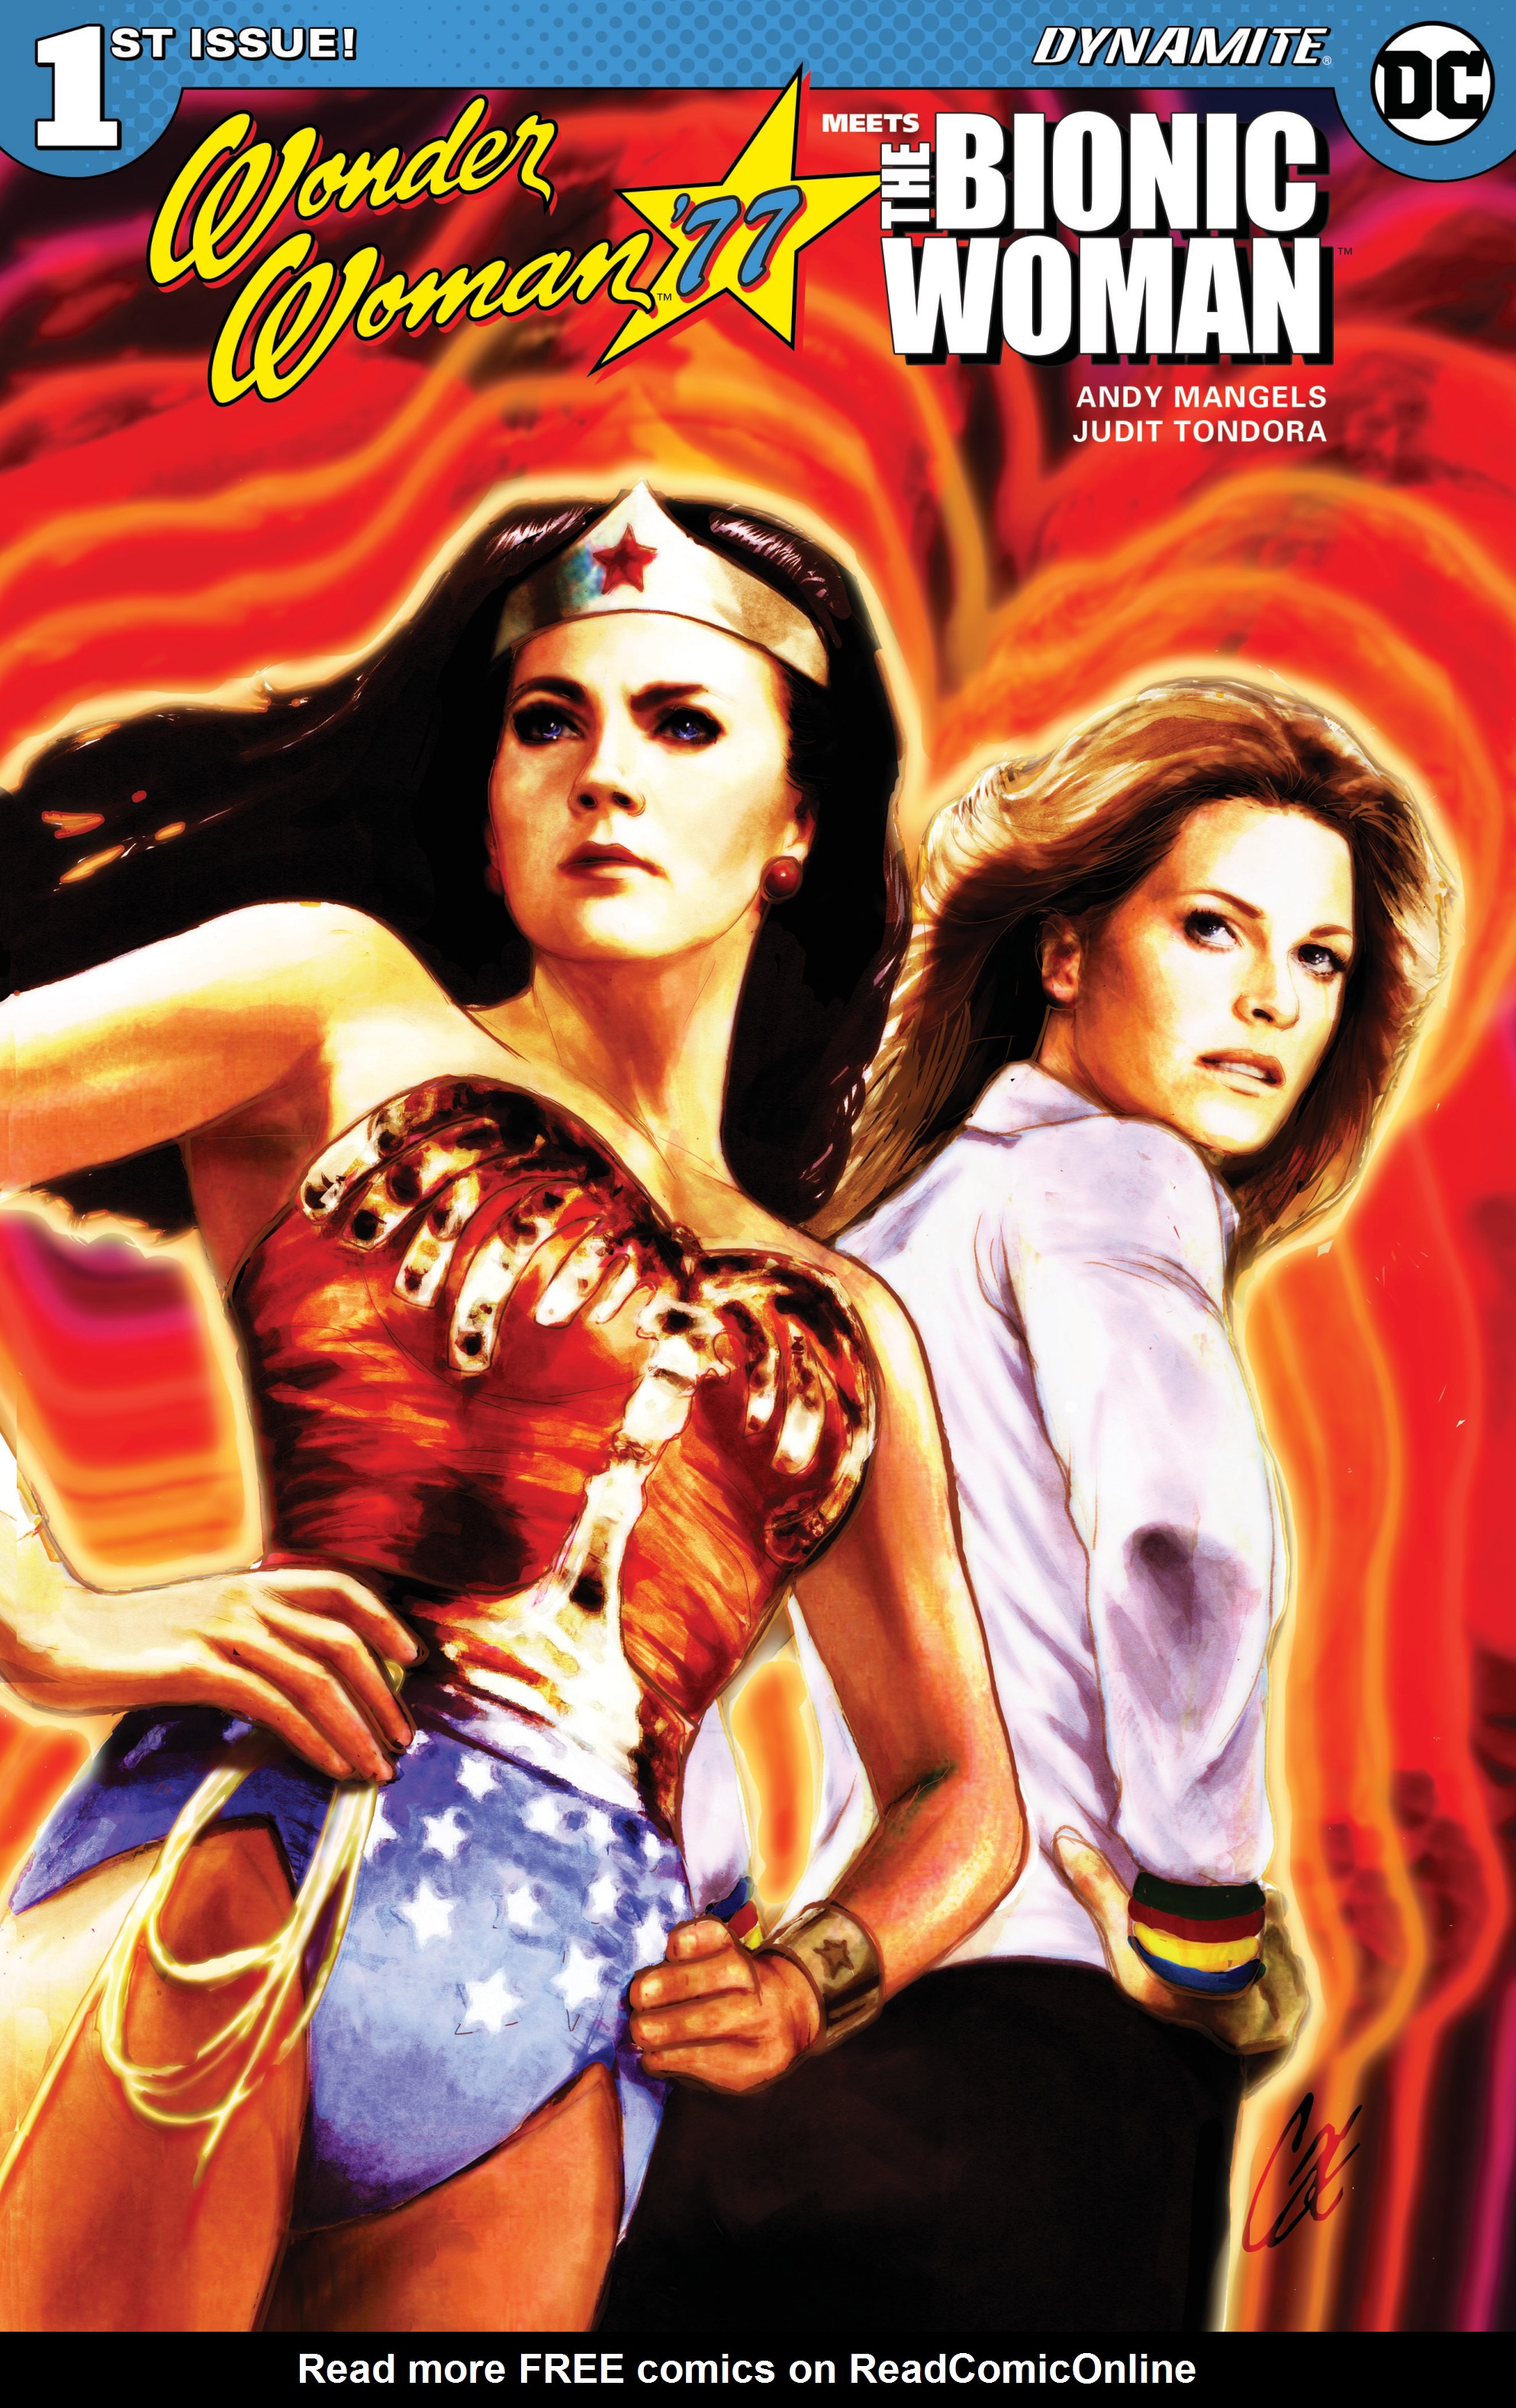 Read online Wonder Woman '77 Meets The Bionic Woman comic -  Issue #1 - 1